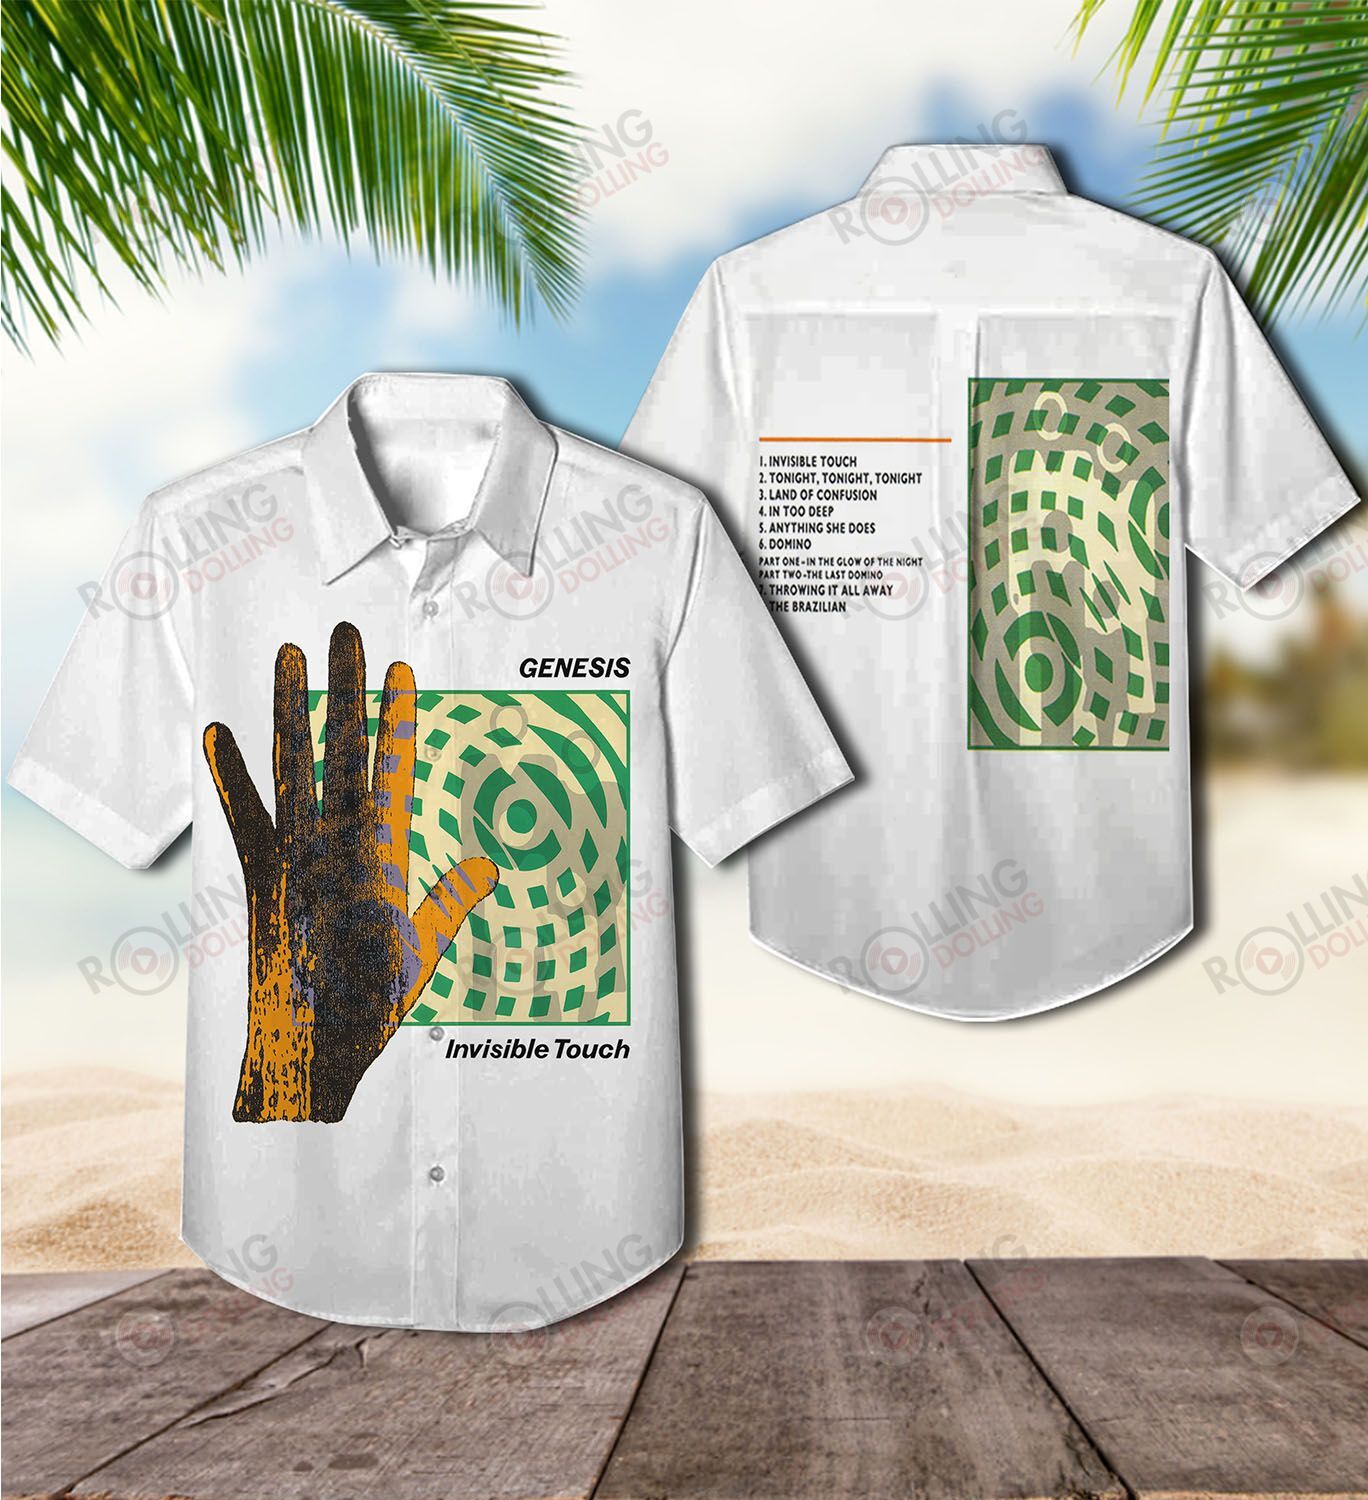 This would make a great gift for any fan who loves Hawaiian Shirt as well as Rock band 56